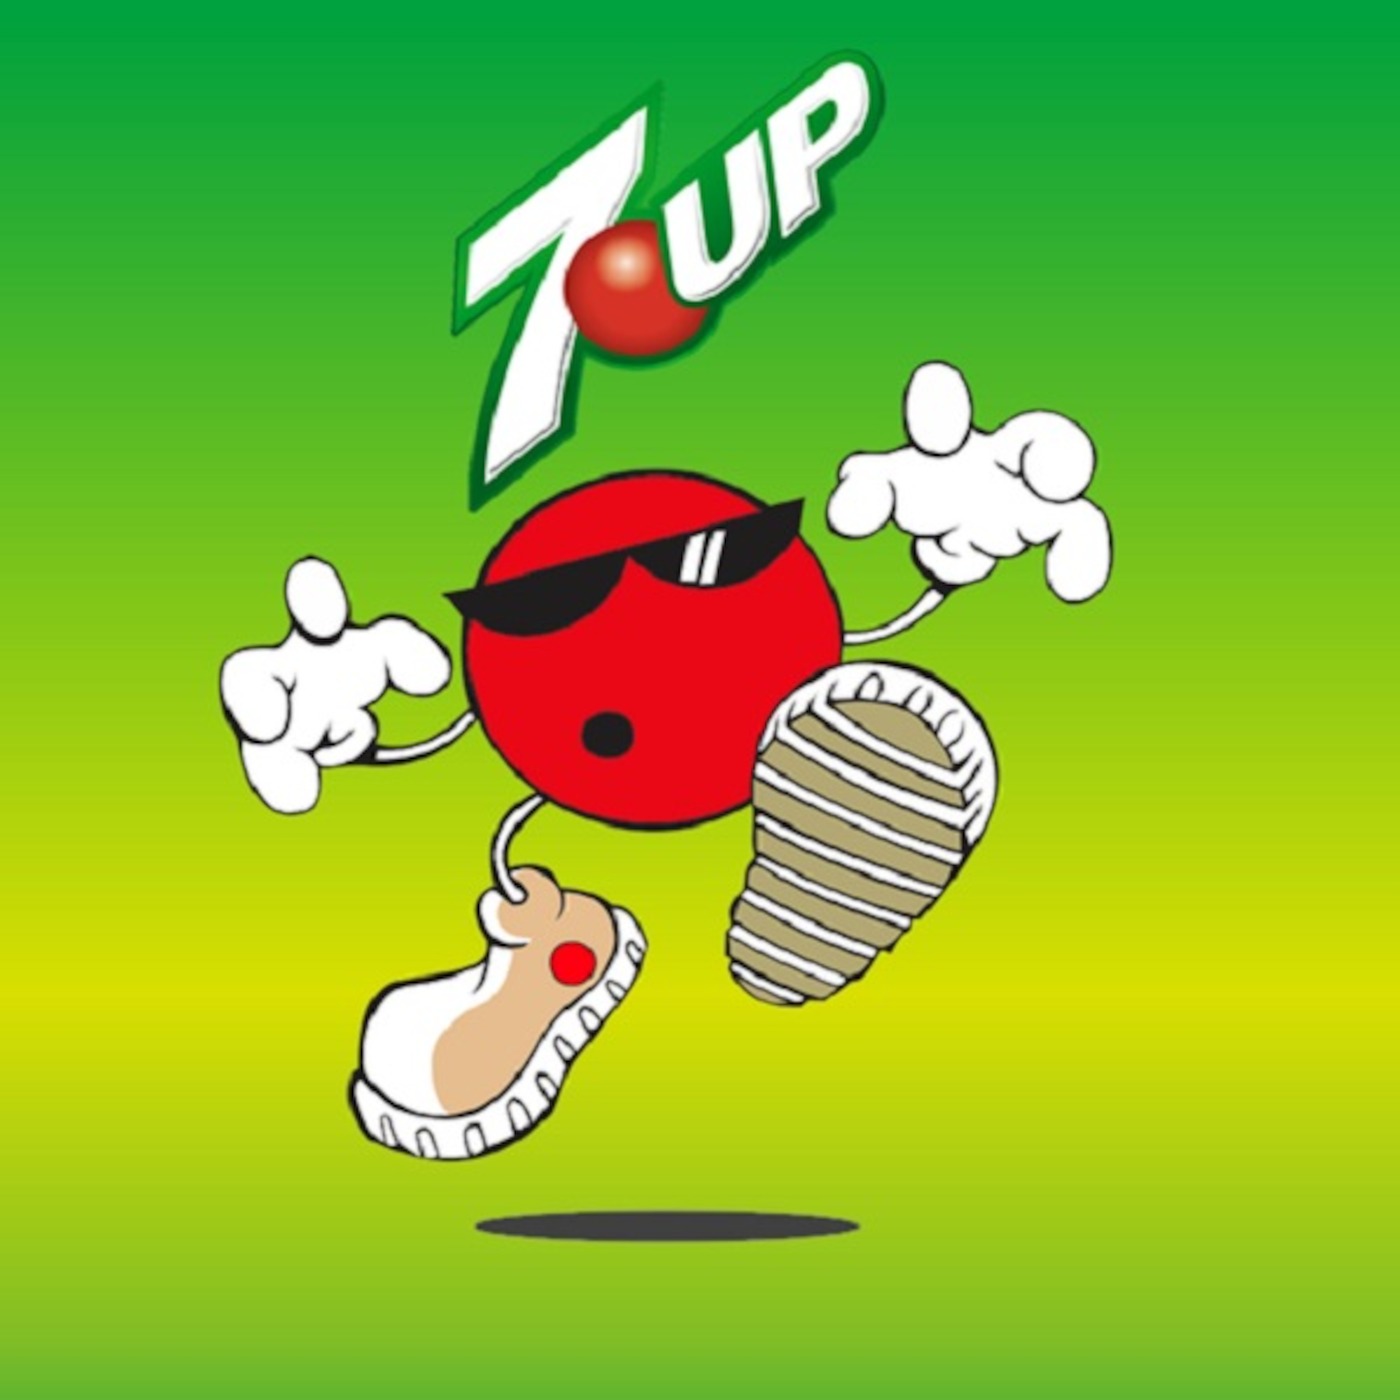 Episode 17 - The 7up Spot